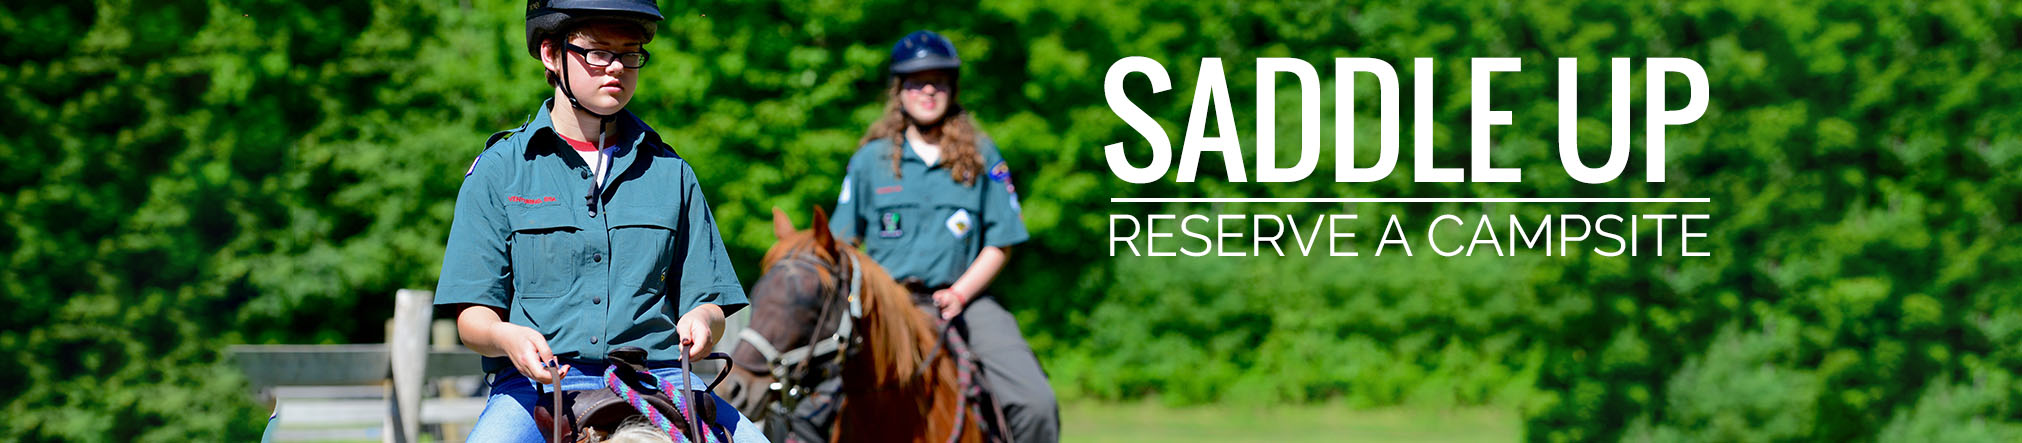 Saddle up! Reserve a campsite now!